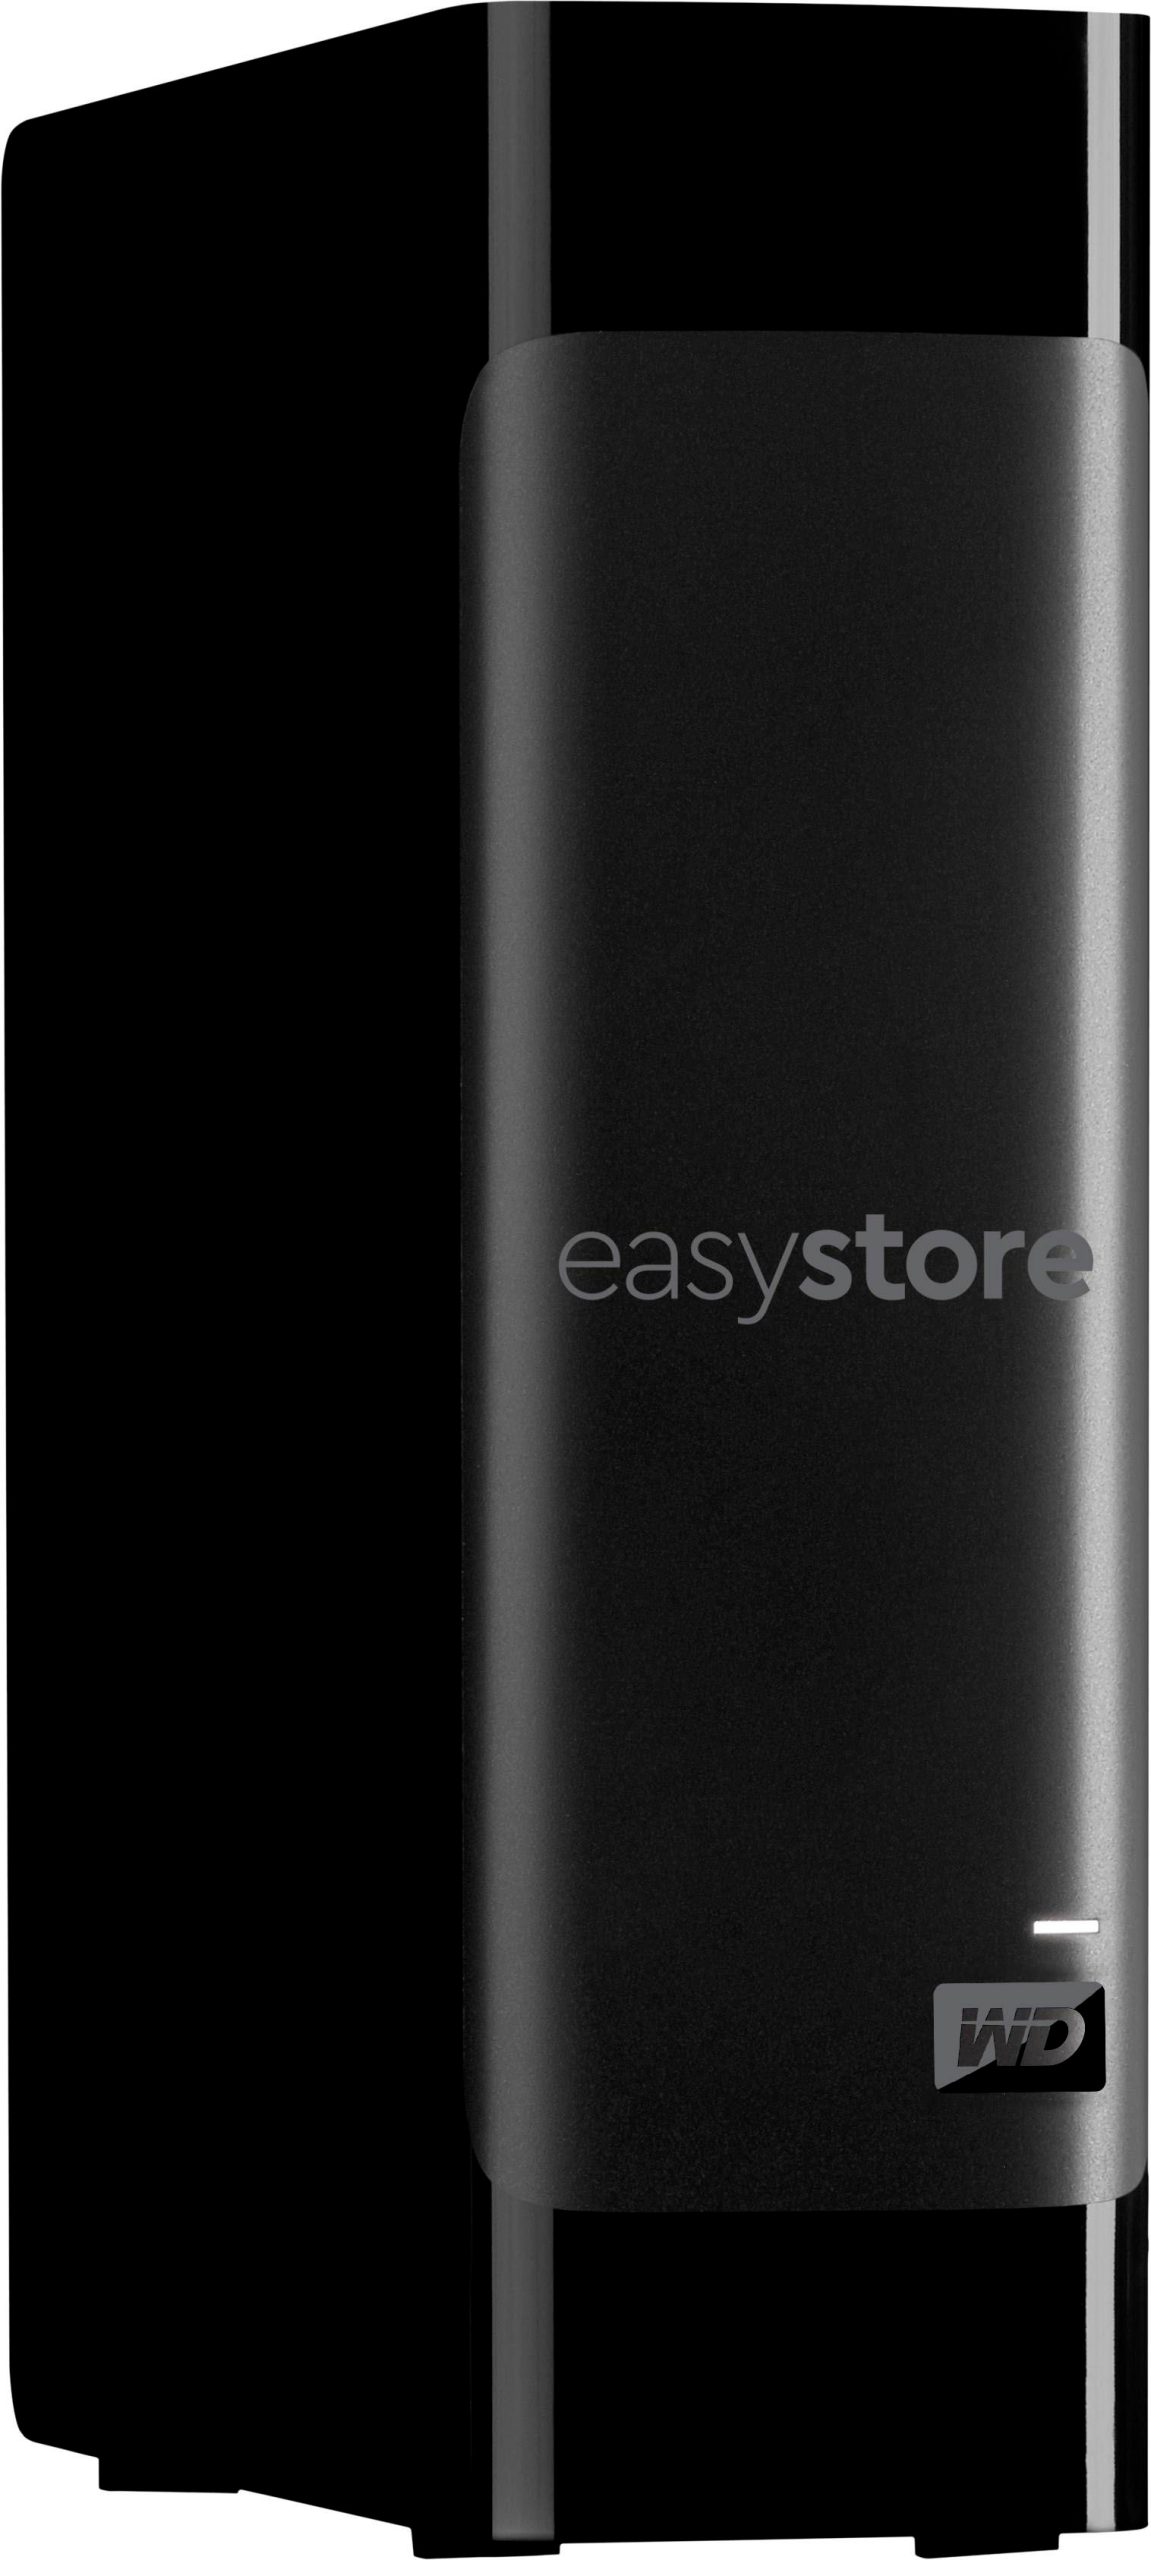 WD – easystore 14TB External USB 3.0 Hard Drive – Black – Just $279.99 at Best Buy